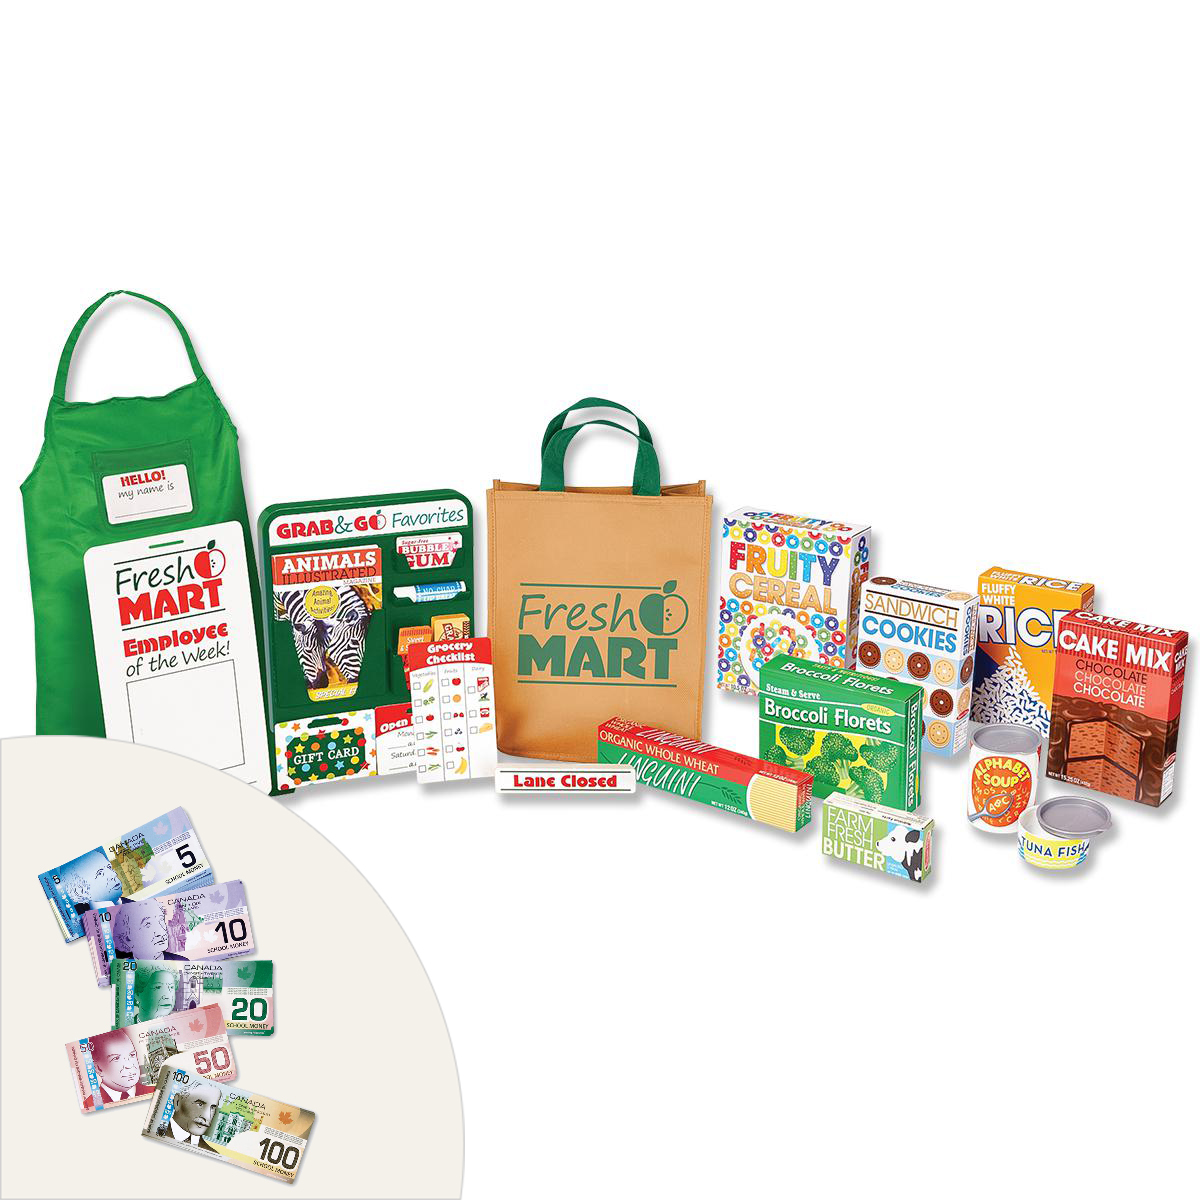  Fresh Mart Grocery Store Play Set Pack 